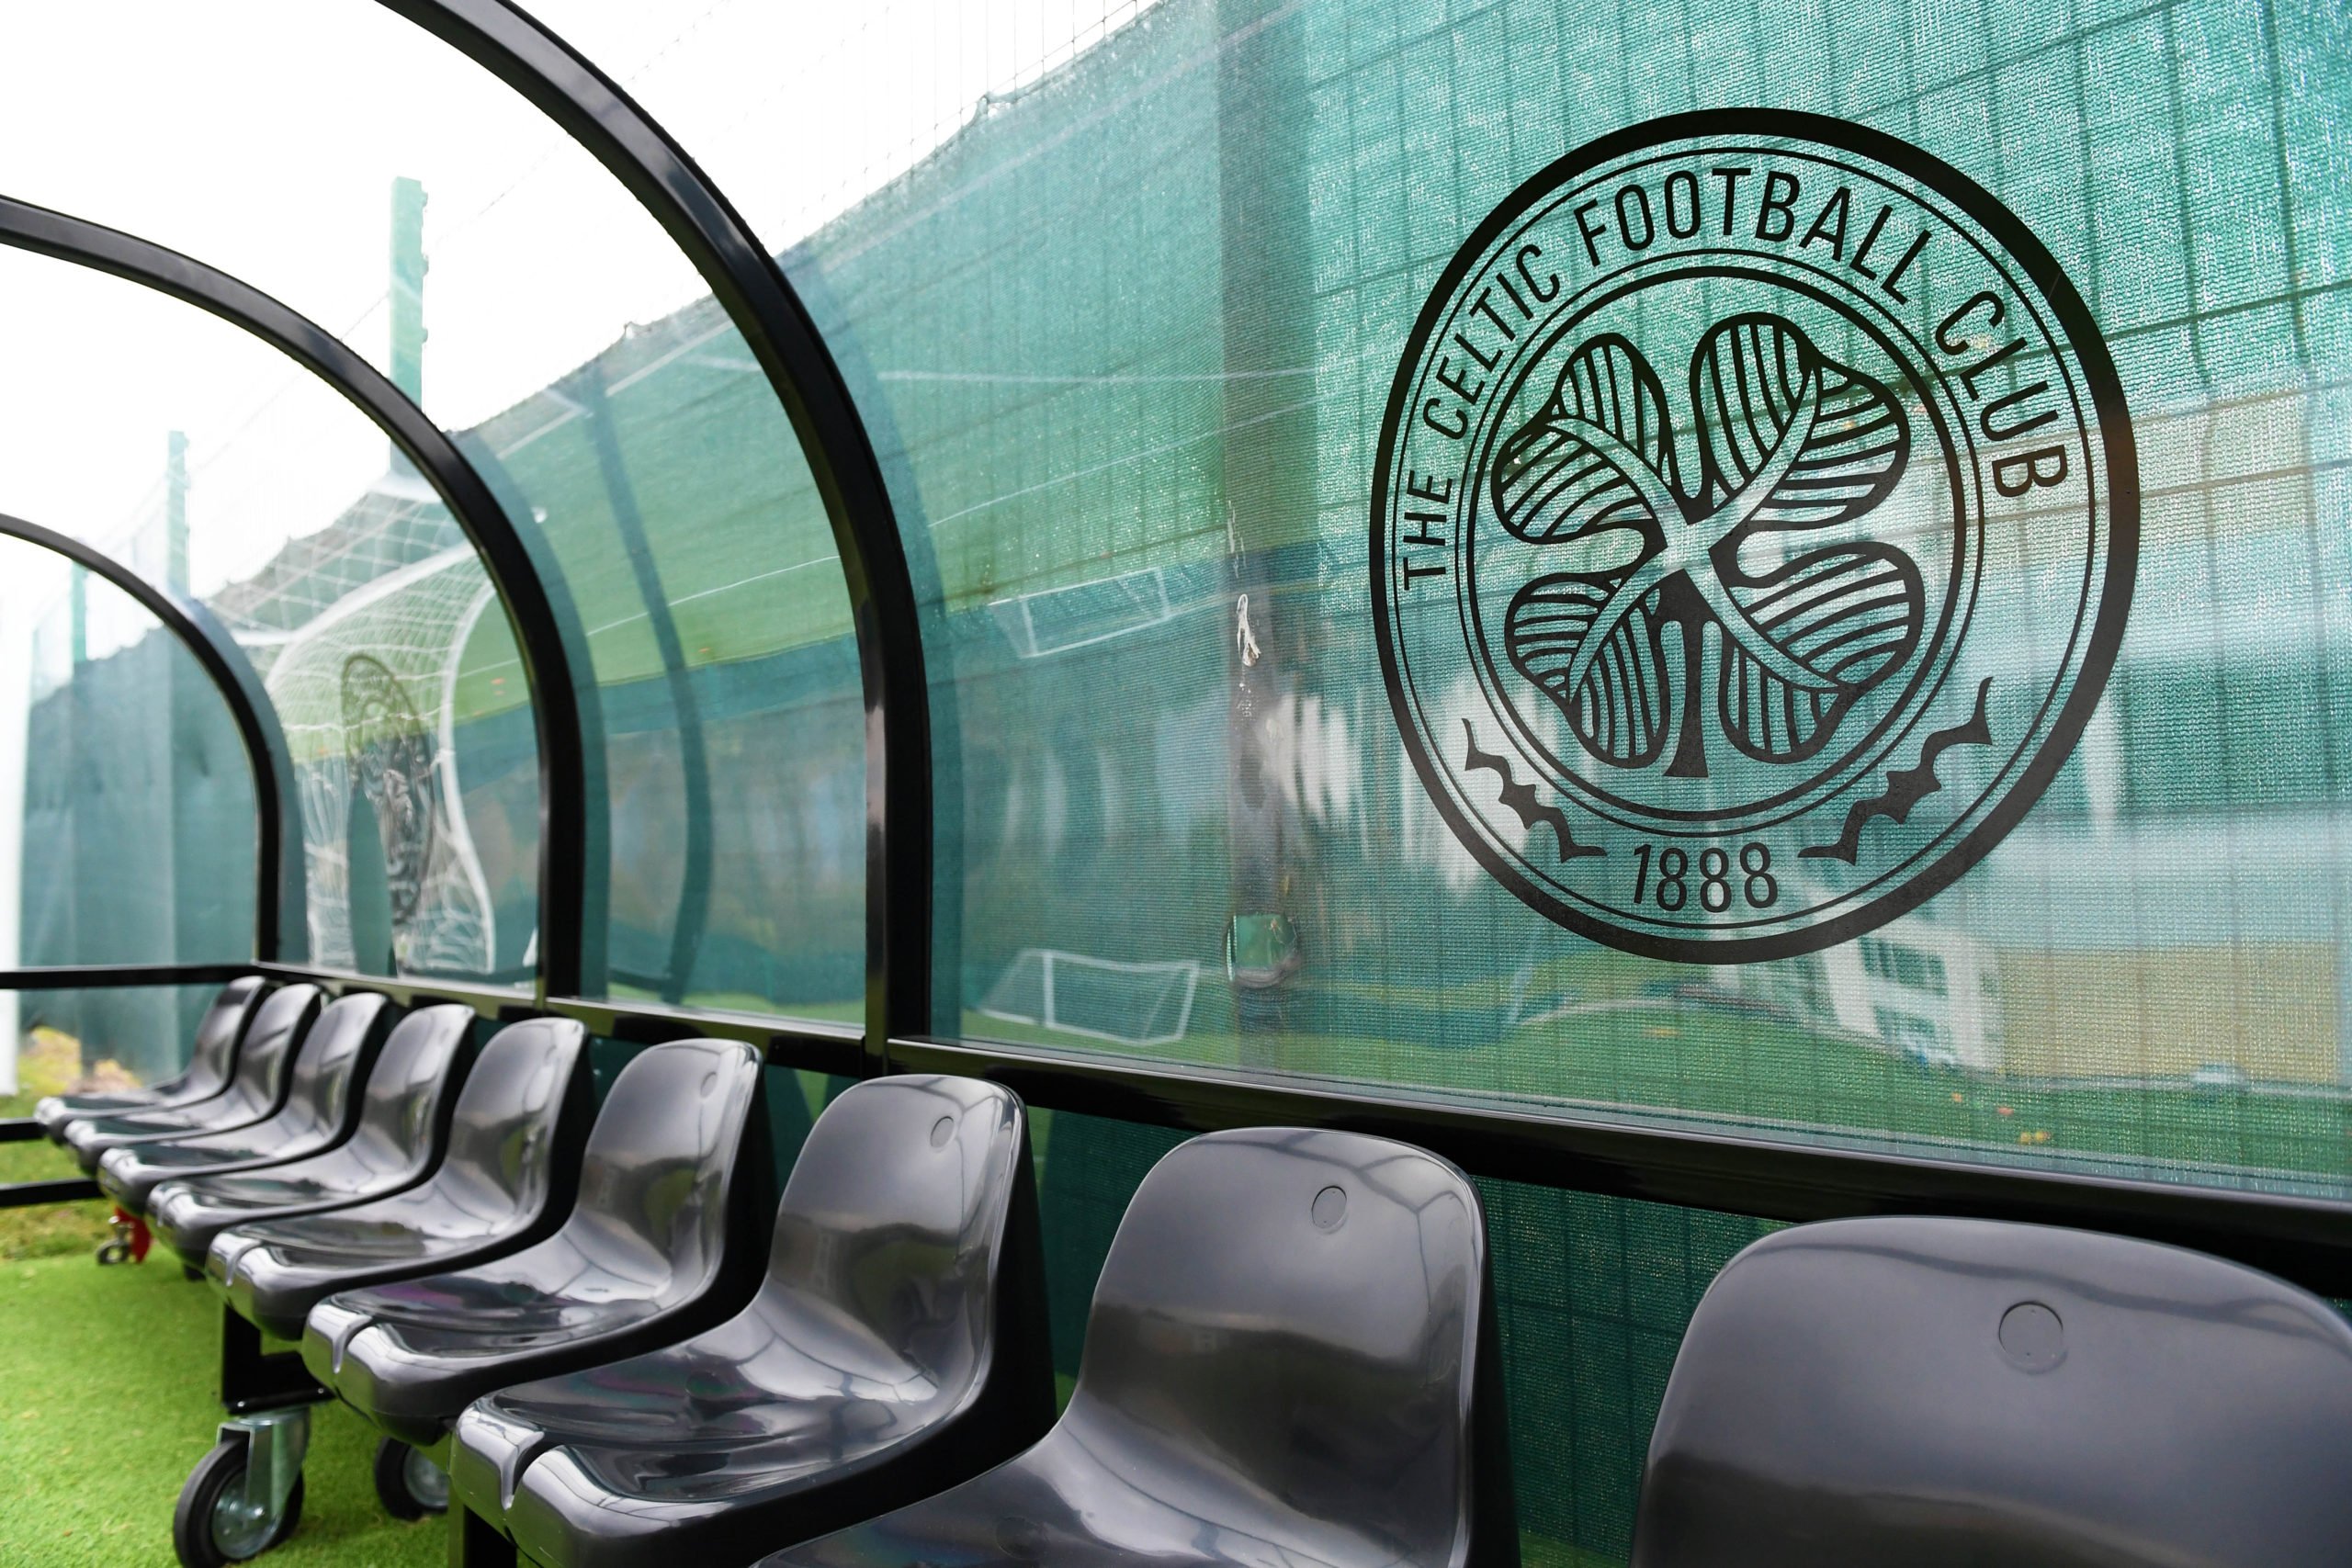 Celtic colts plan to reportedly fall through in frustrating fashion